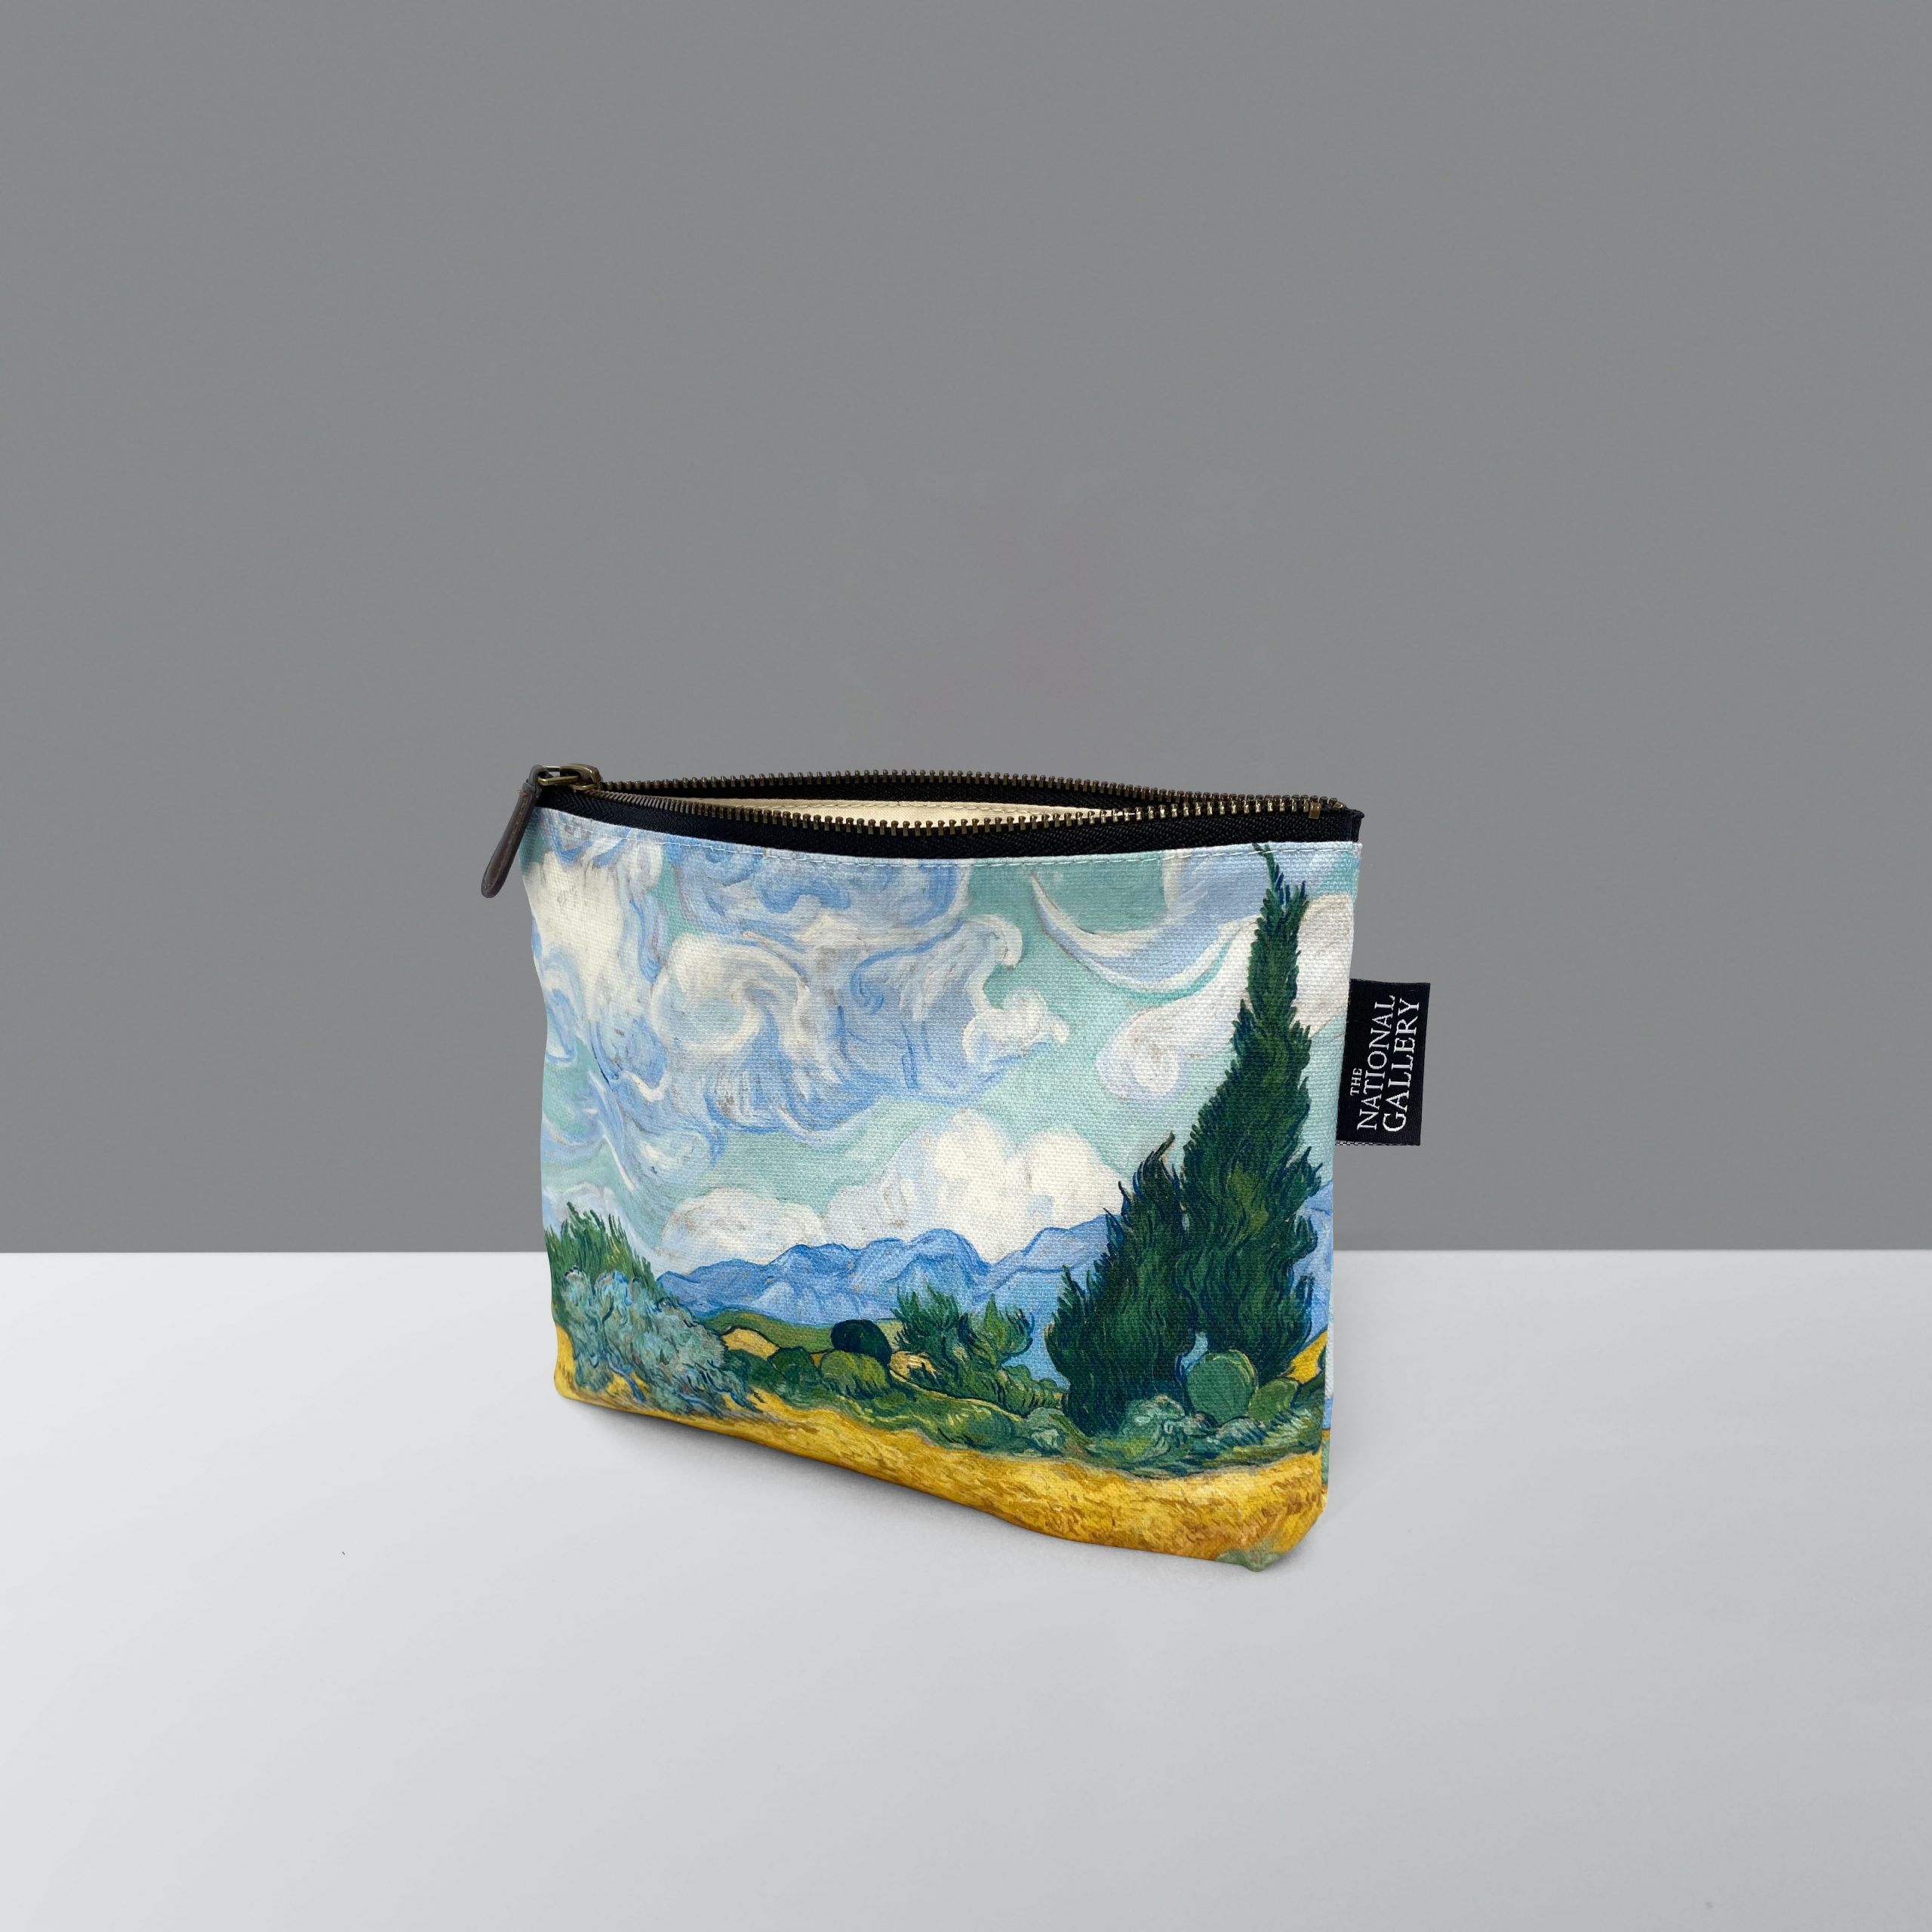 National Gallery – Printed Cosmetic Purses